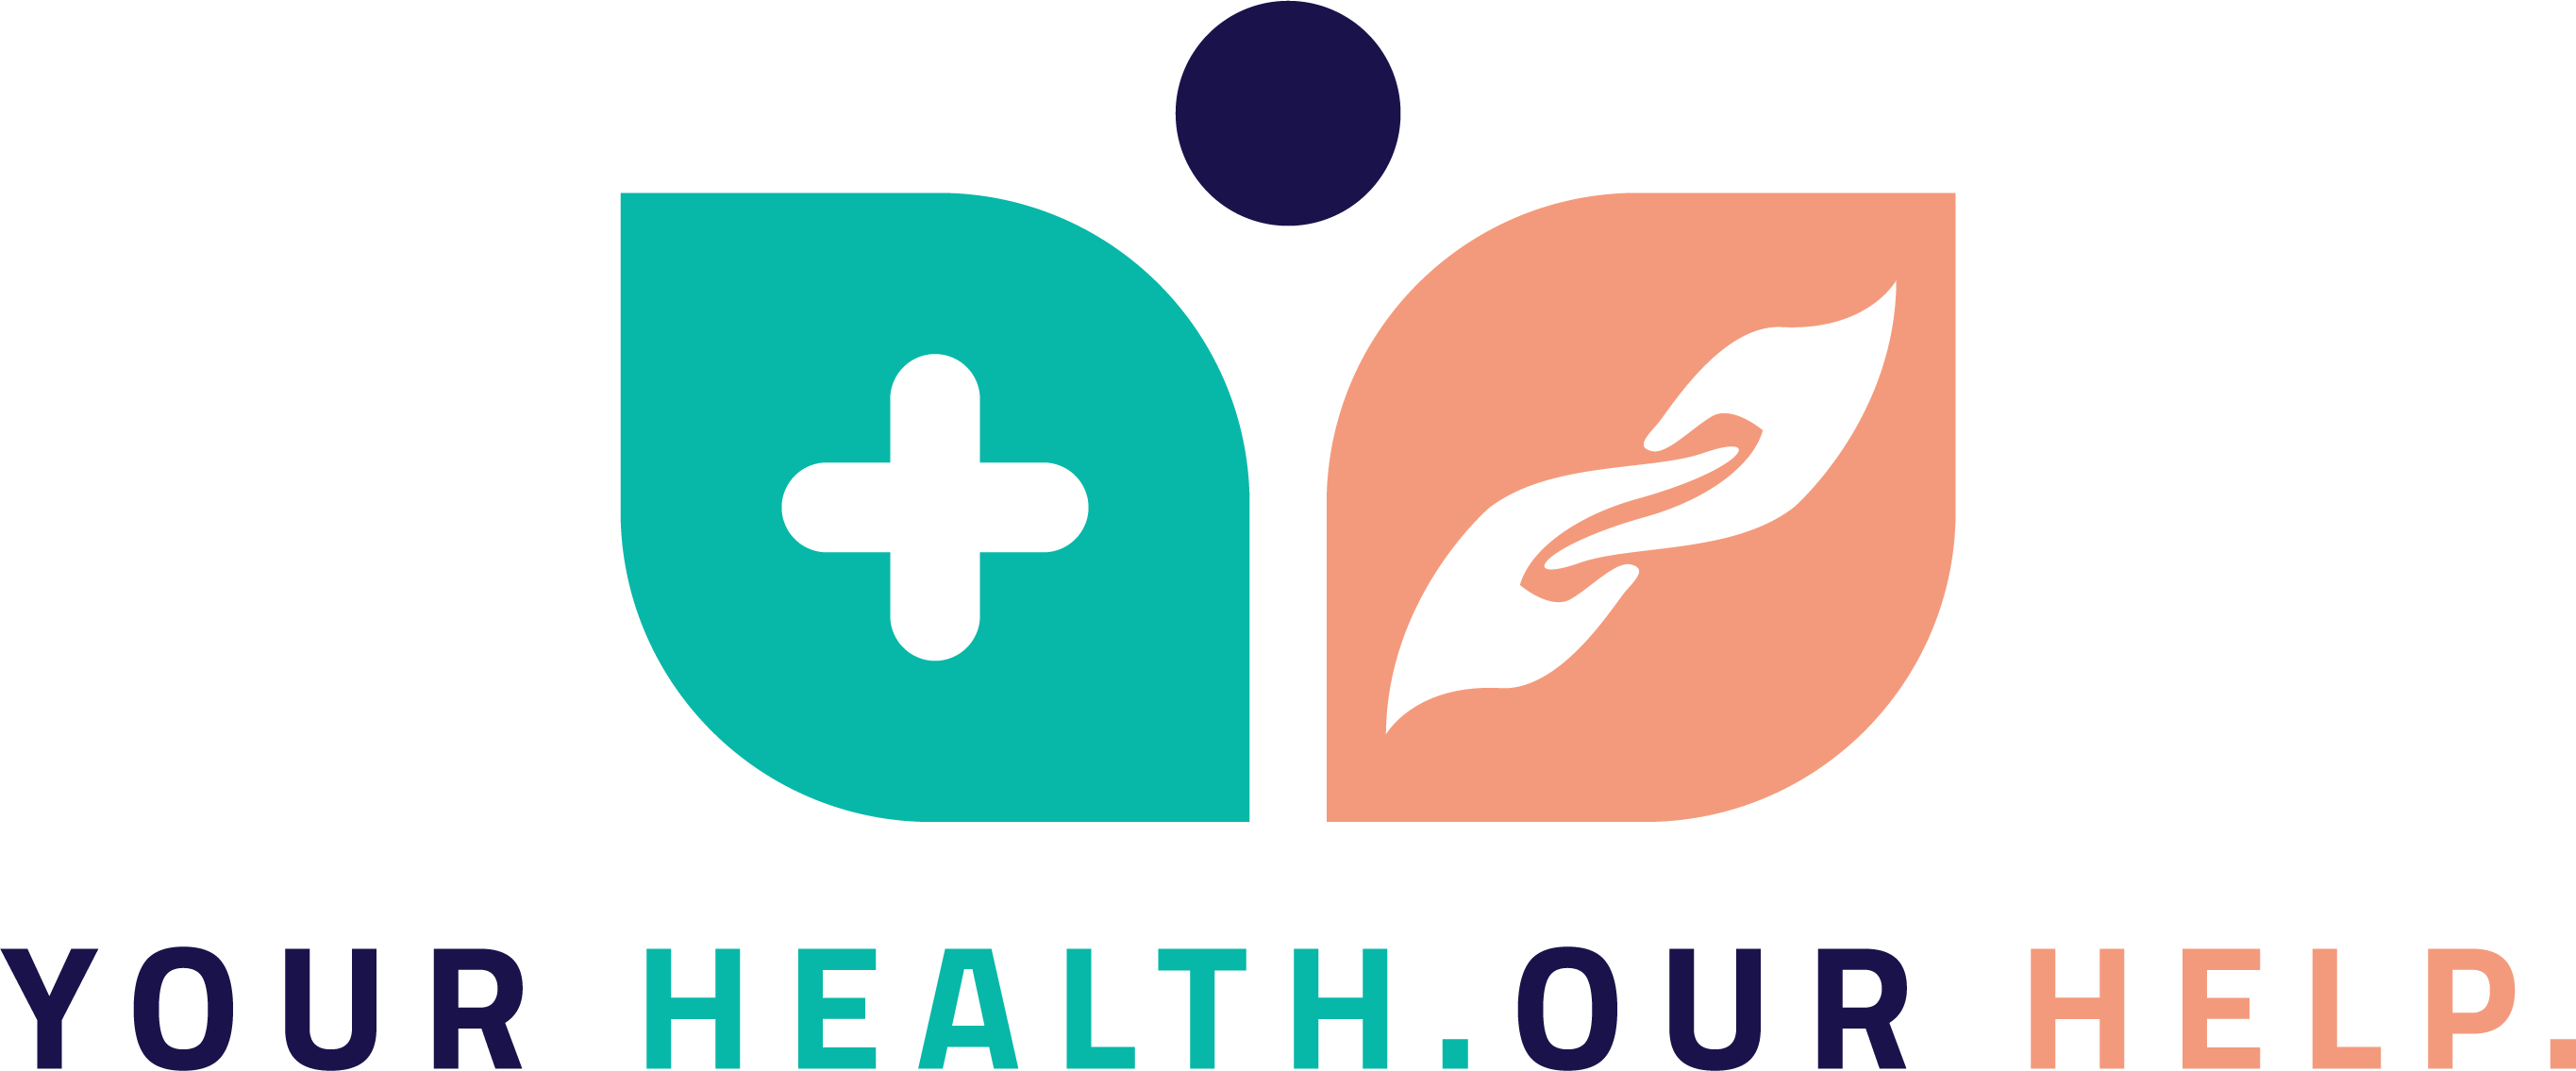 YHOH - Your Health Our Help logo